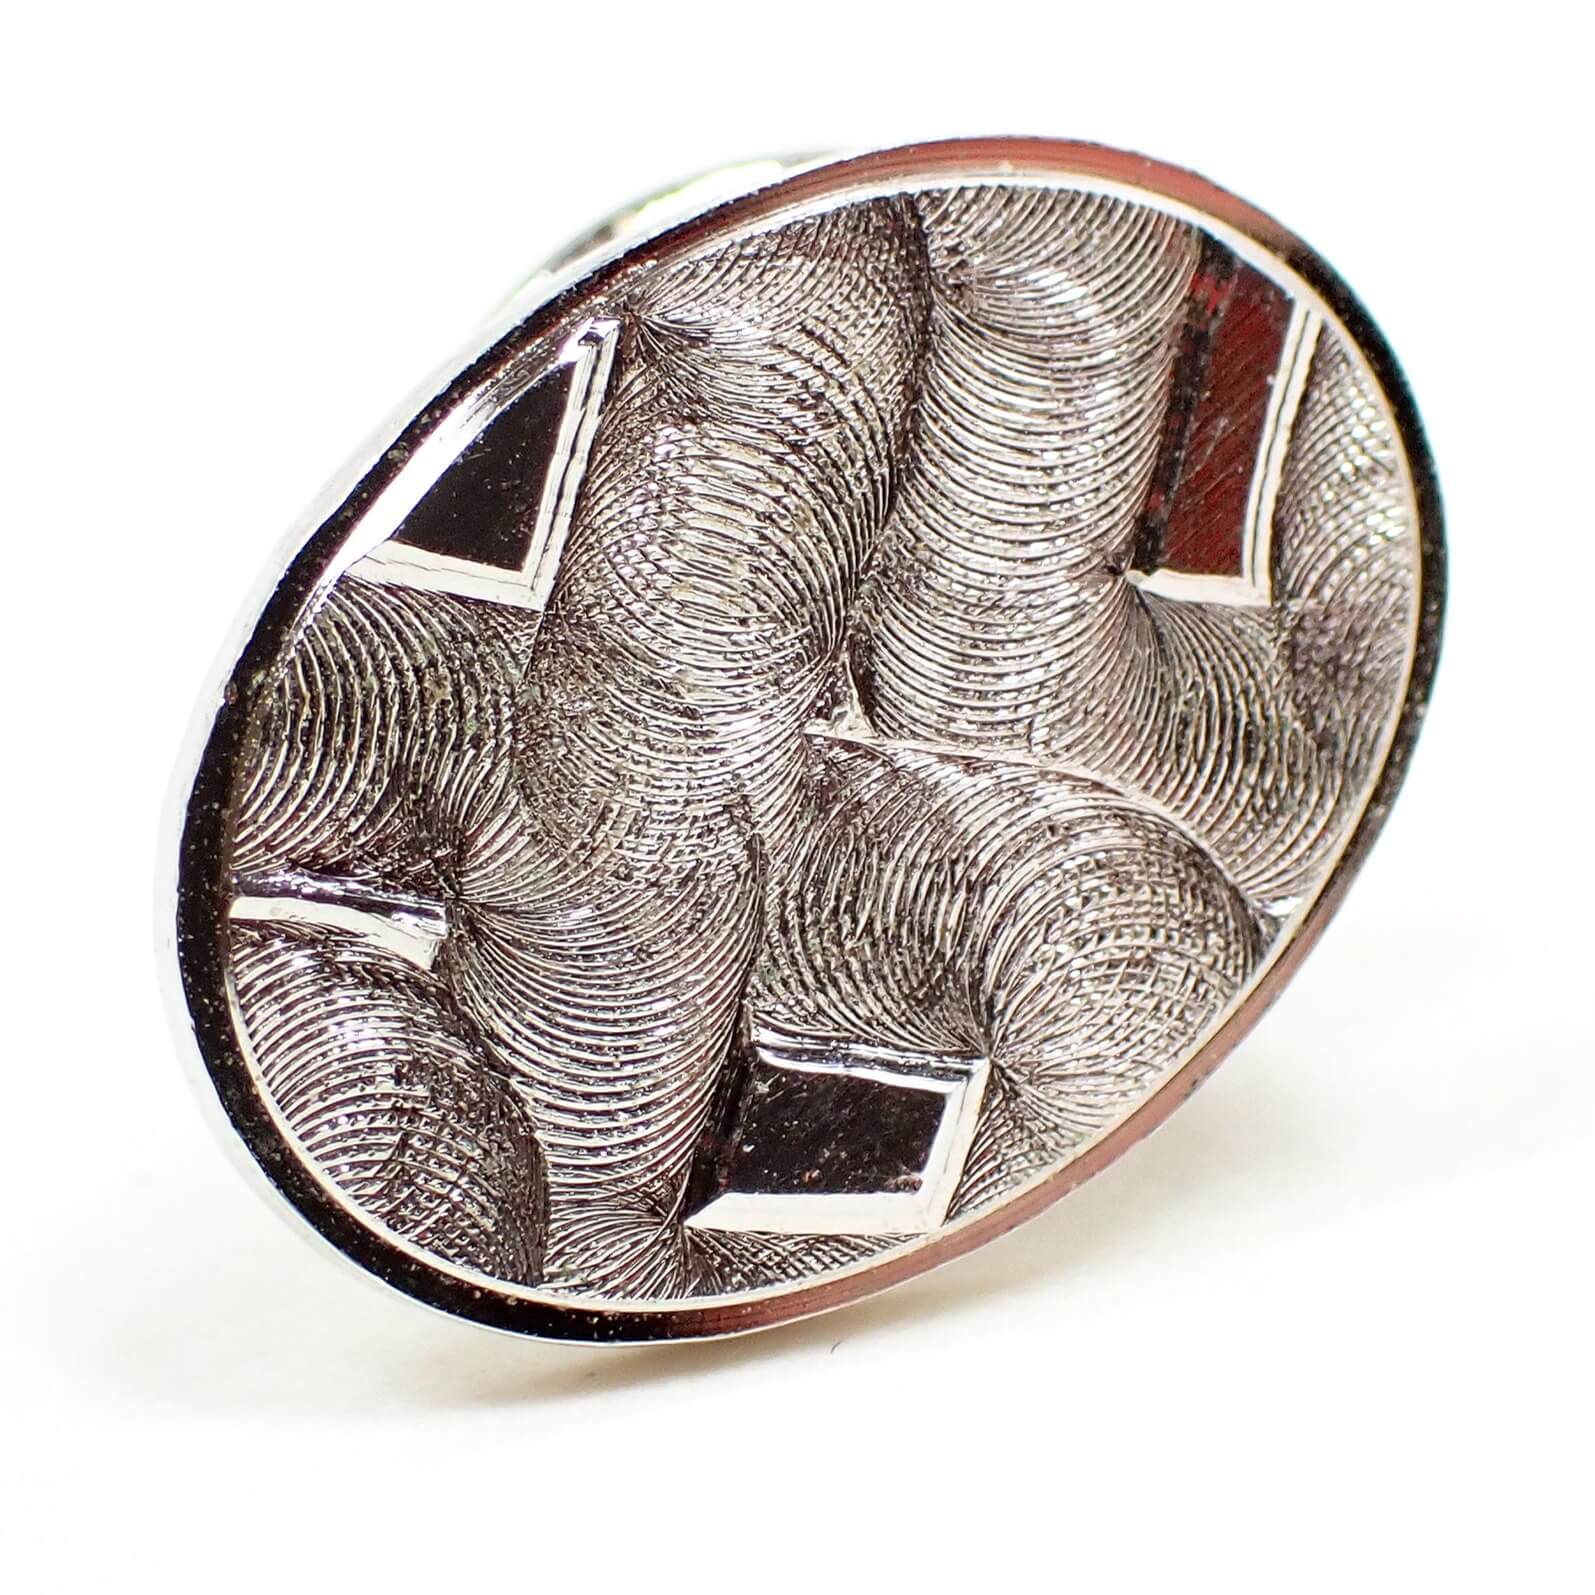 Enlarged front view of the retro vintage tie tack. It is oval in shape with a textured matte silver tone plated front. 